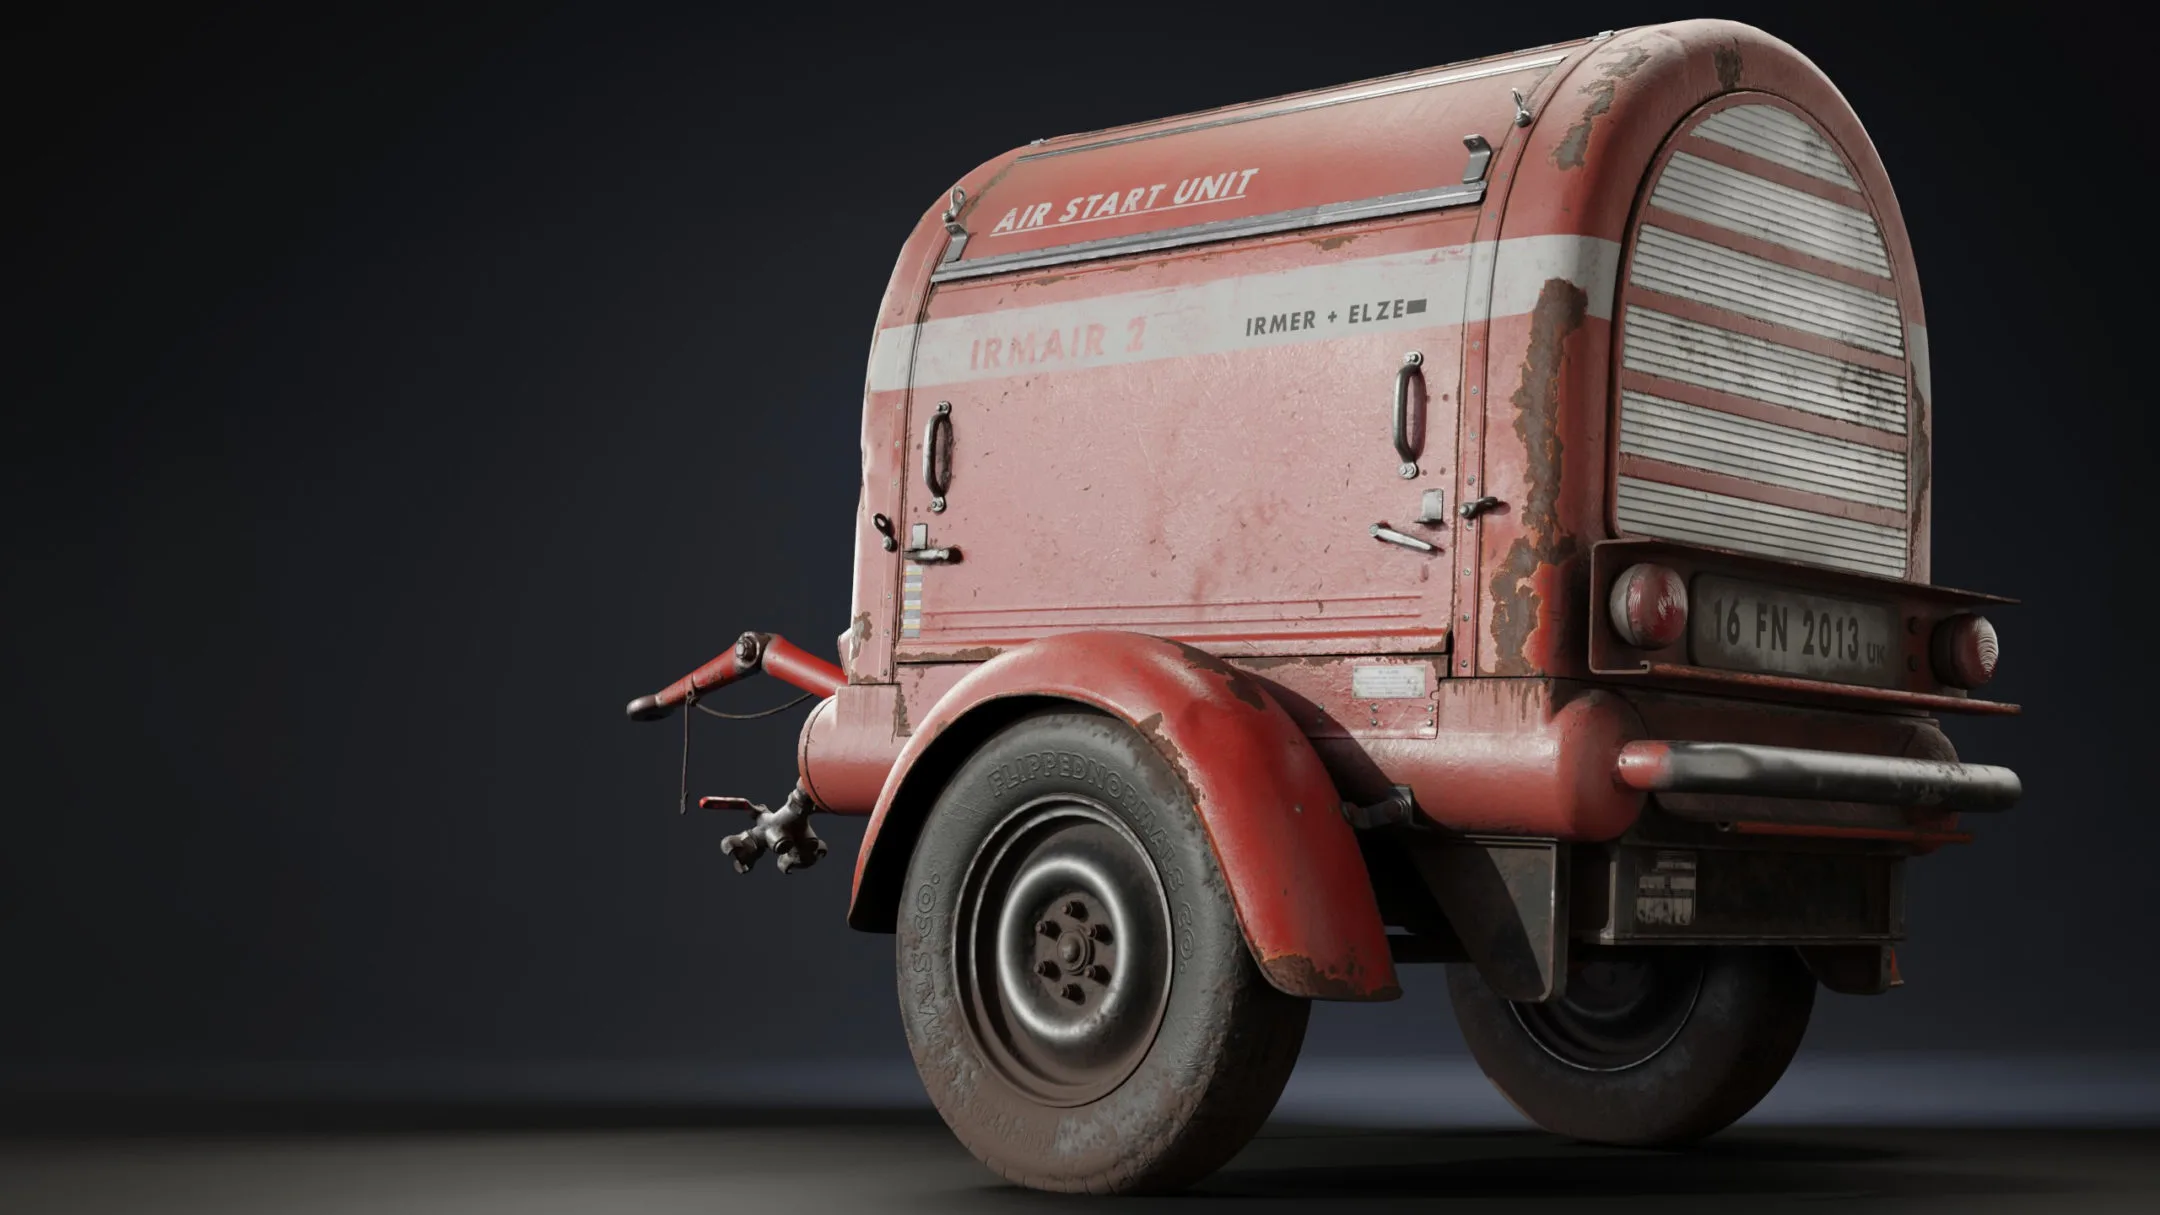 Advanced Texturing in Substance Painter